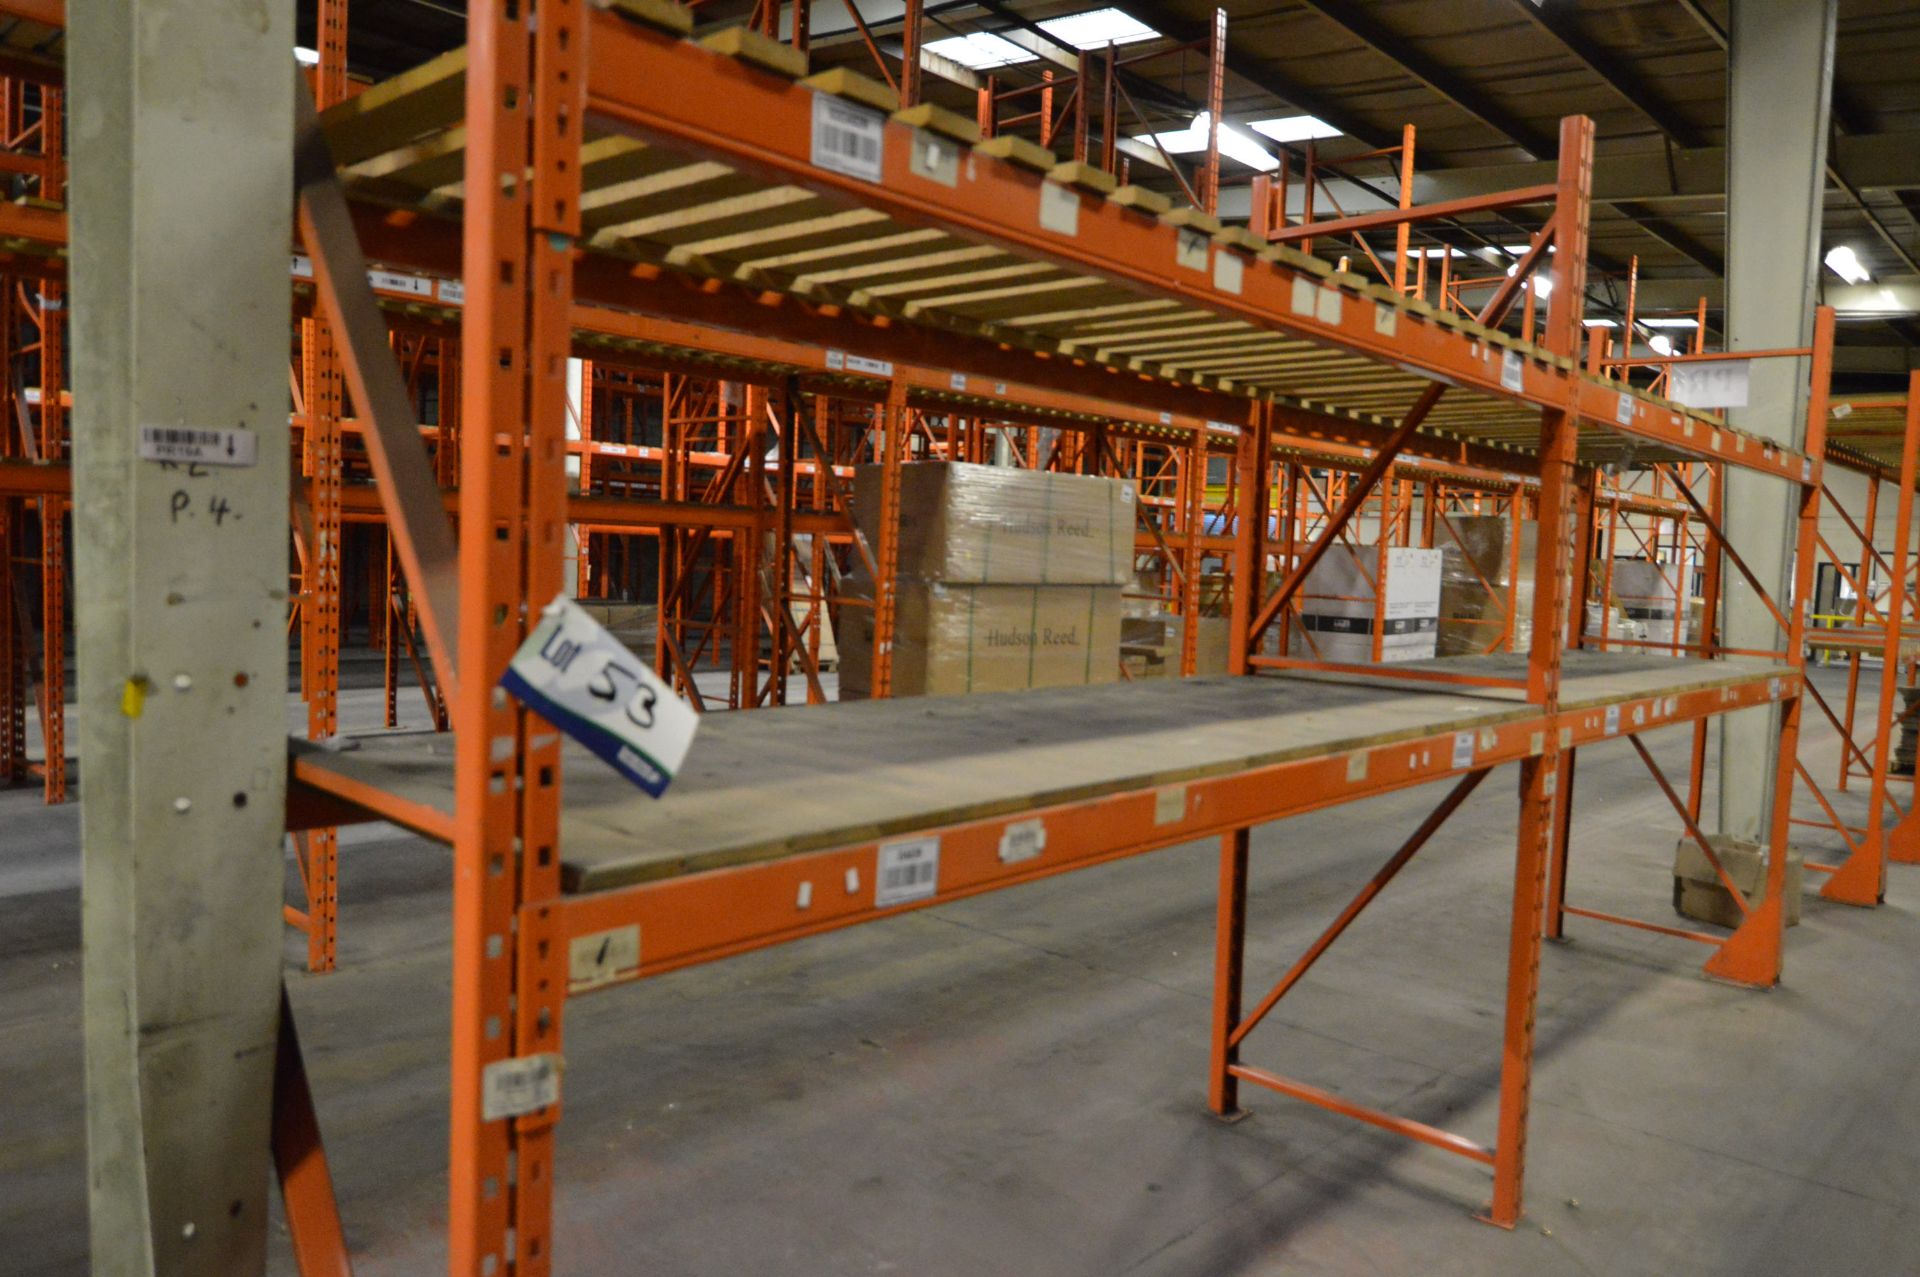 Redirack SD1.70 Single Sided Two Bay Two Tier Pallet Rack, approx. 5.5m long x 900mm x 2.7m high, - Image 2 of 2